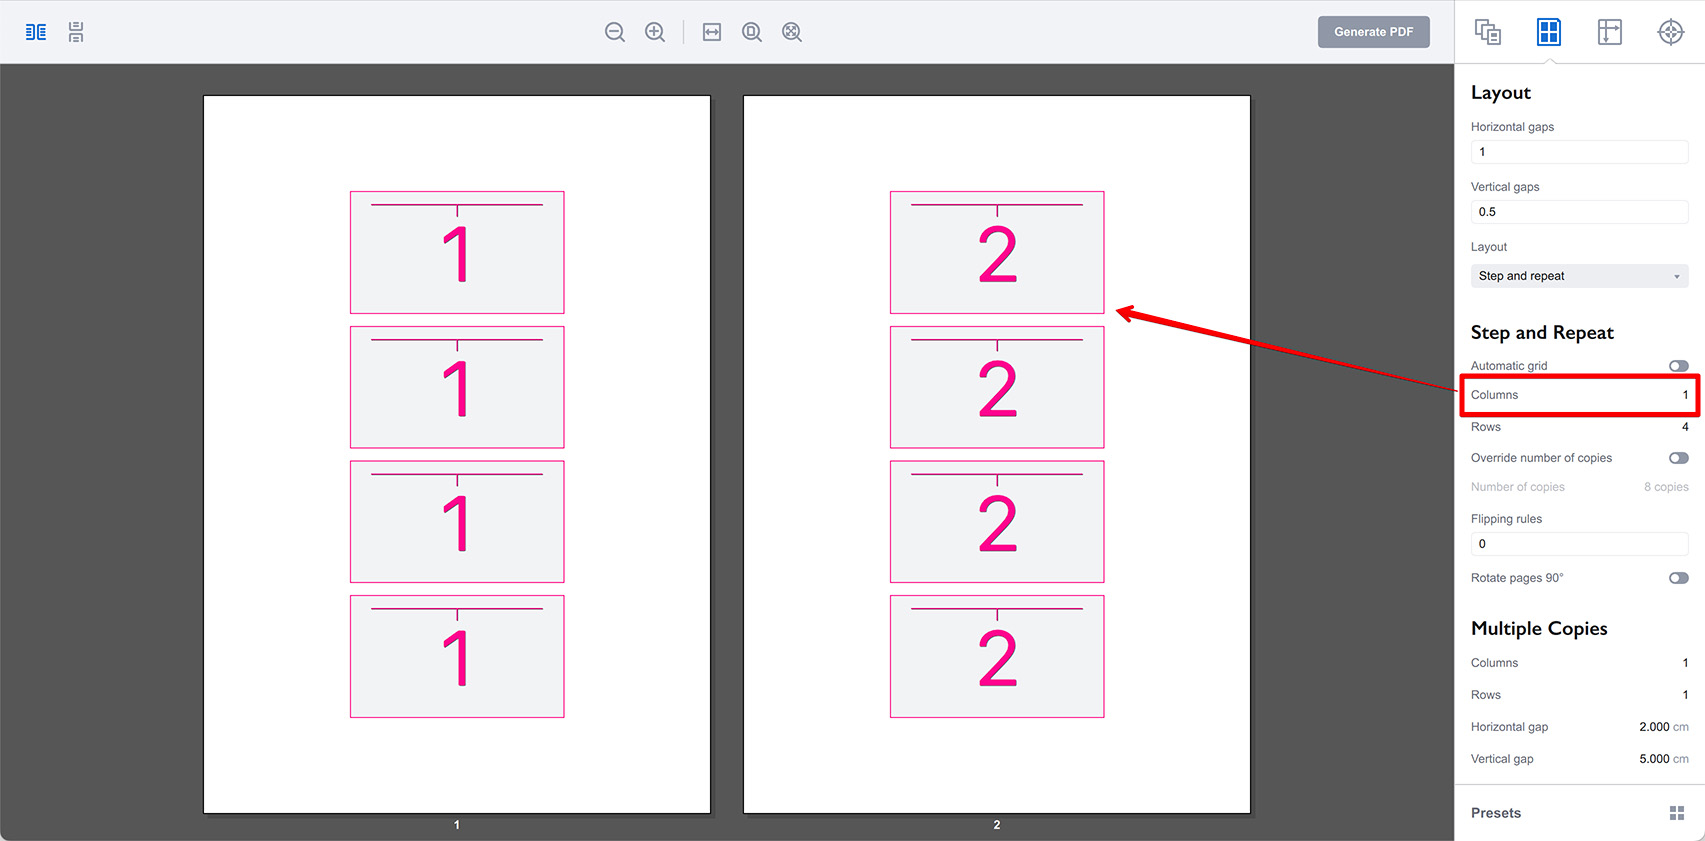 Changing the number of columns in the step and repeat layout